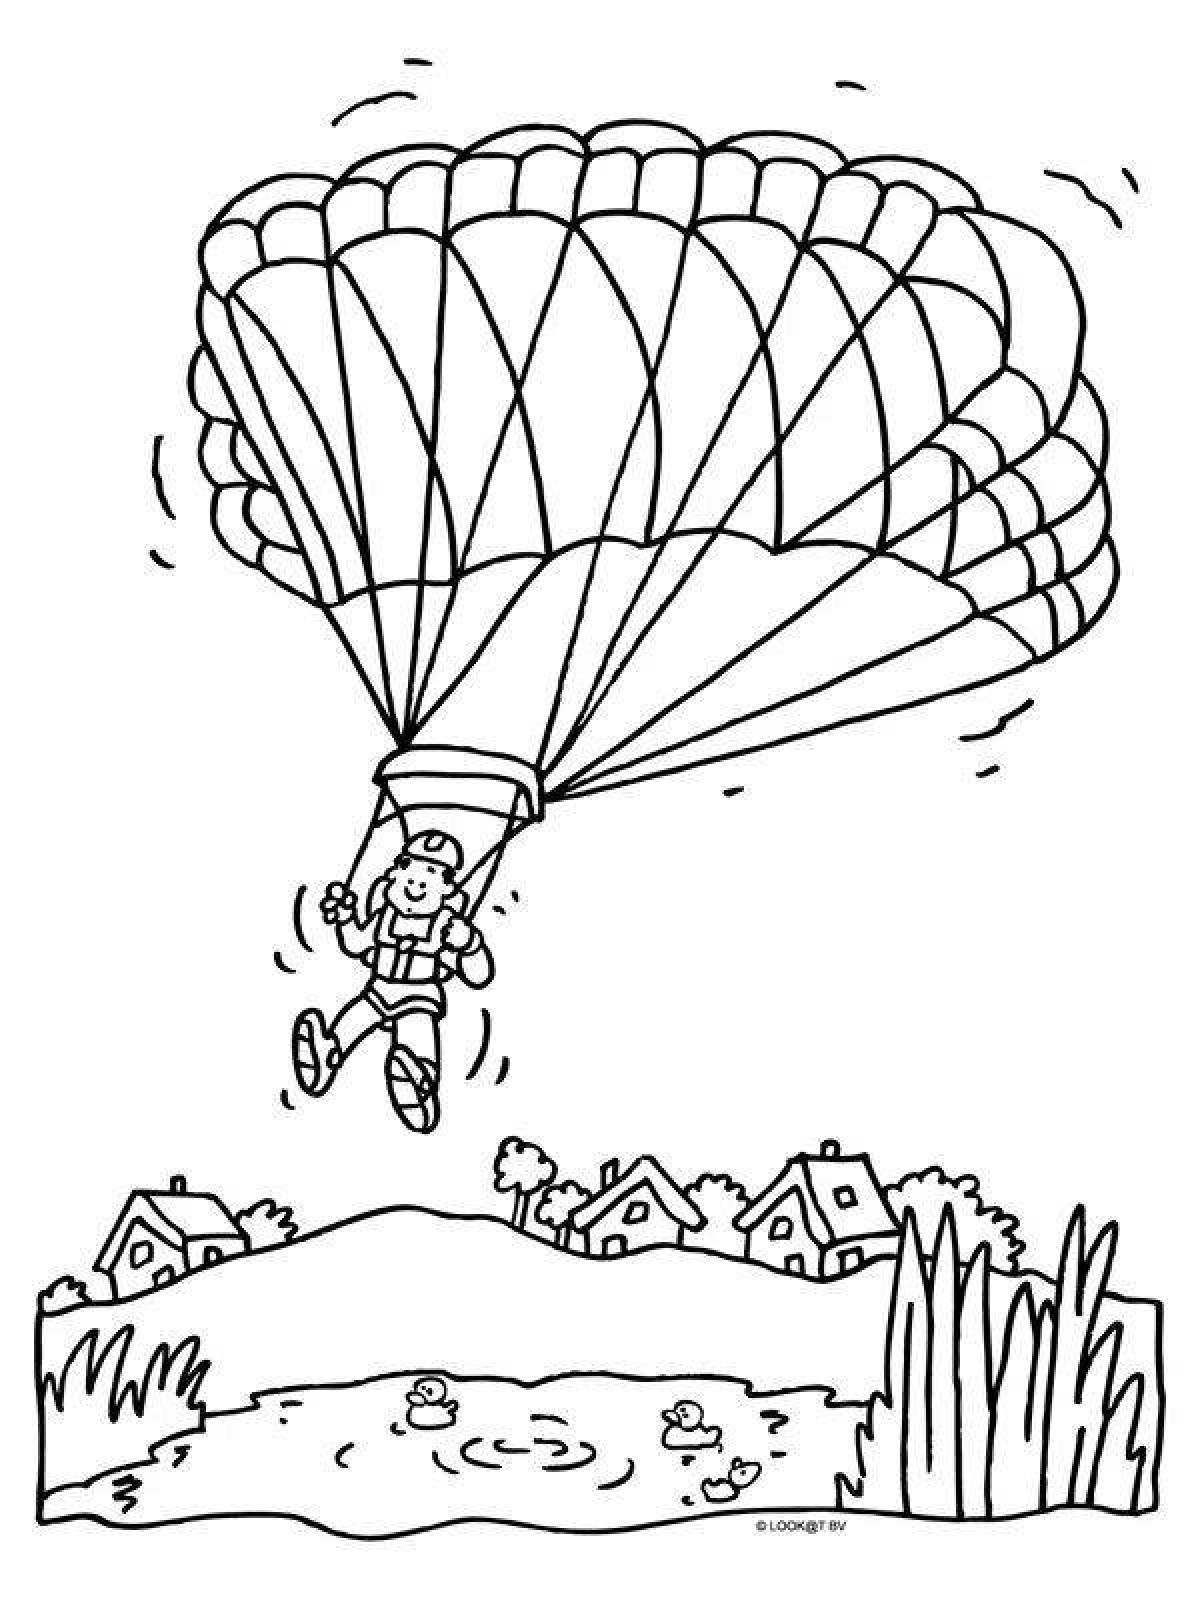 Courageous paratrooper coloring page